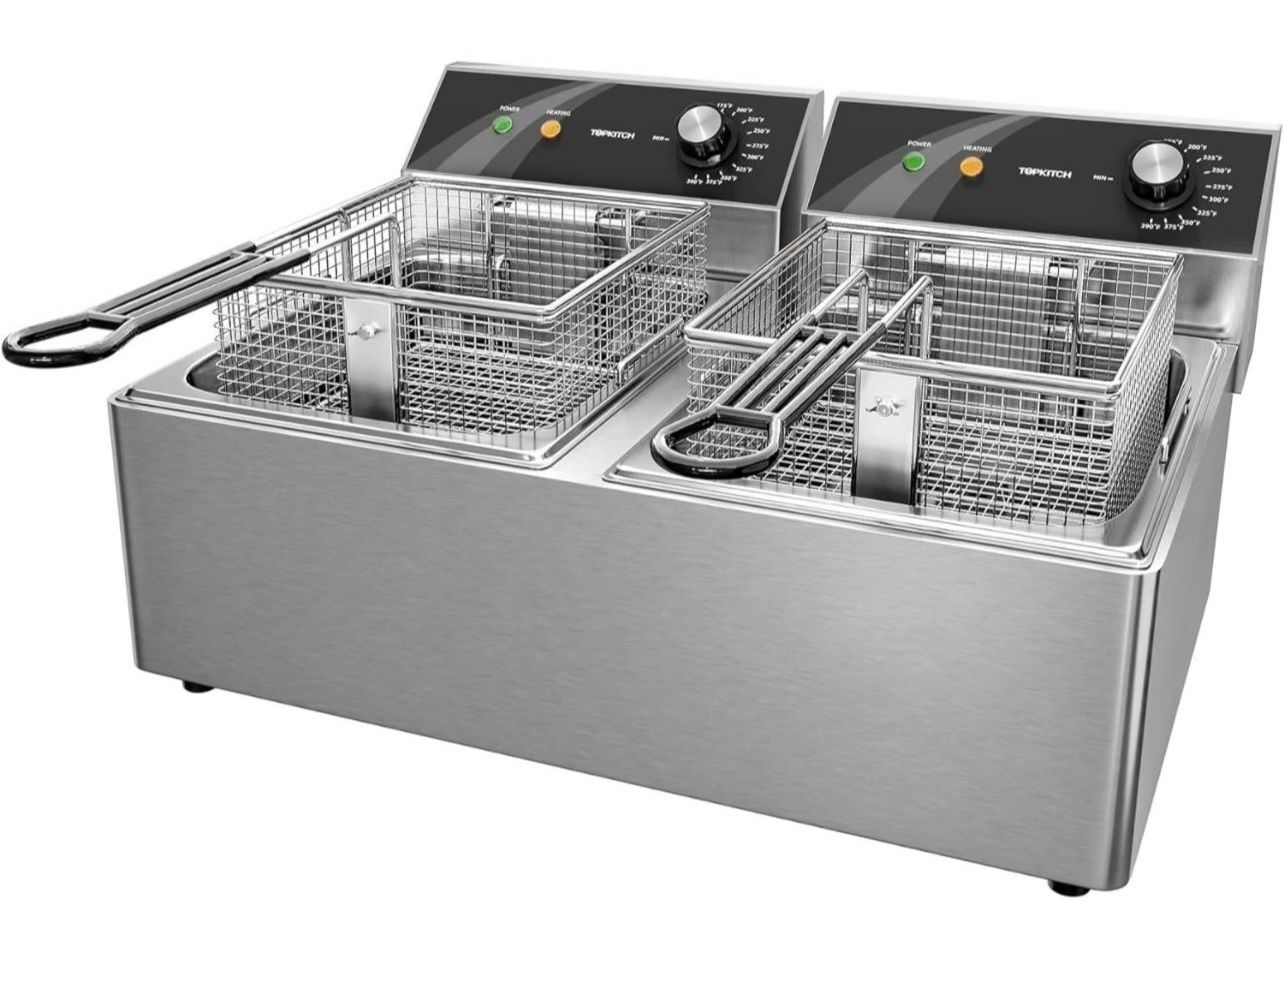 Commercial Deep Fryer Stainless Steel Dual Tank with 2 Baskets Capacity 10L X 2 Electric Countertop Fryer for Restaurant and Home Use, 120V 3600W